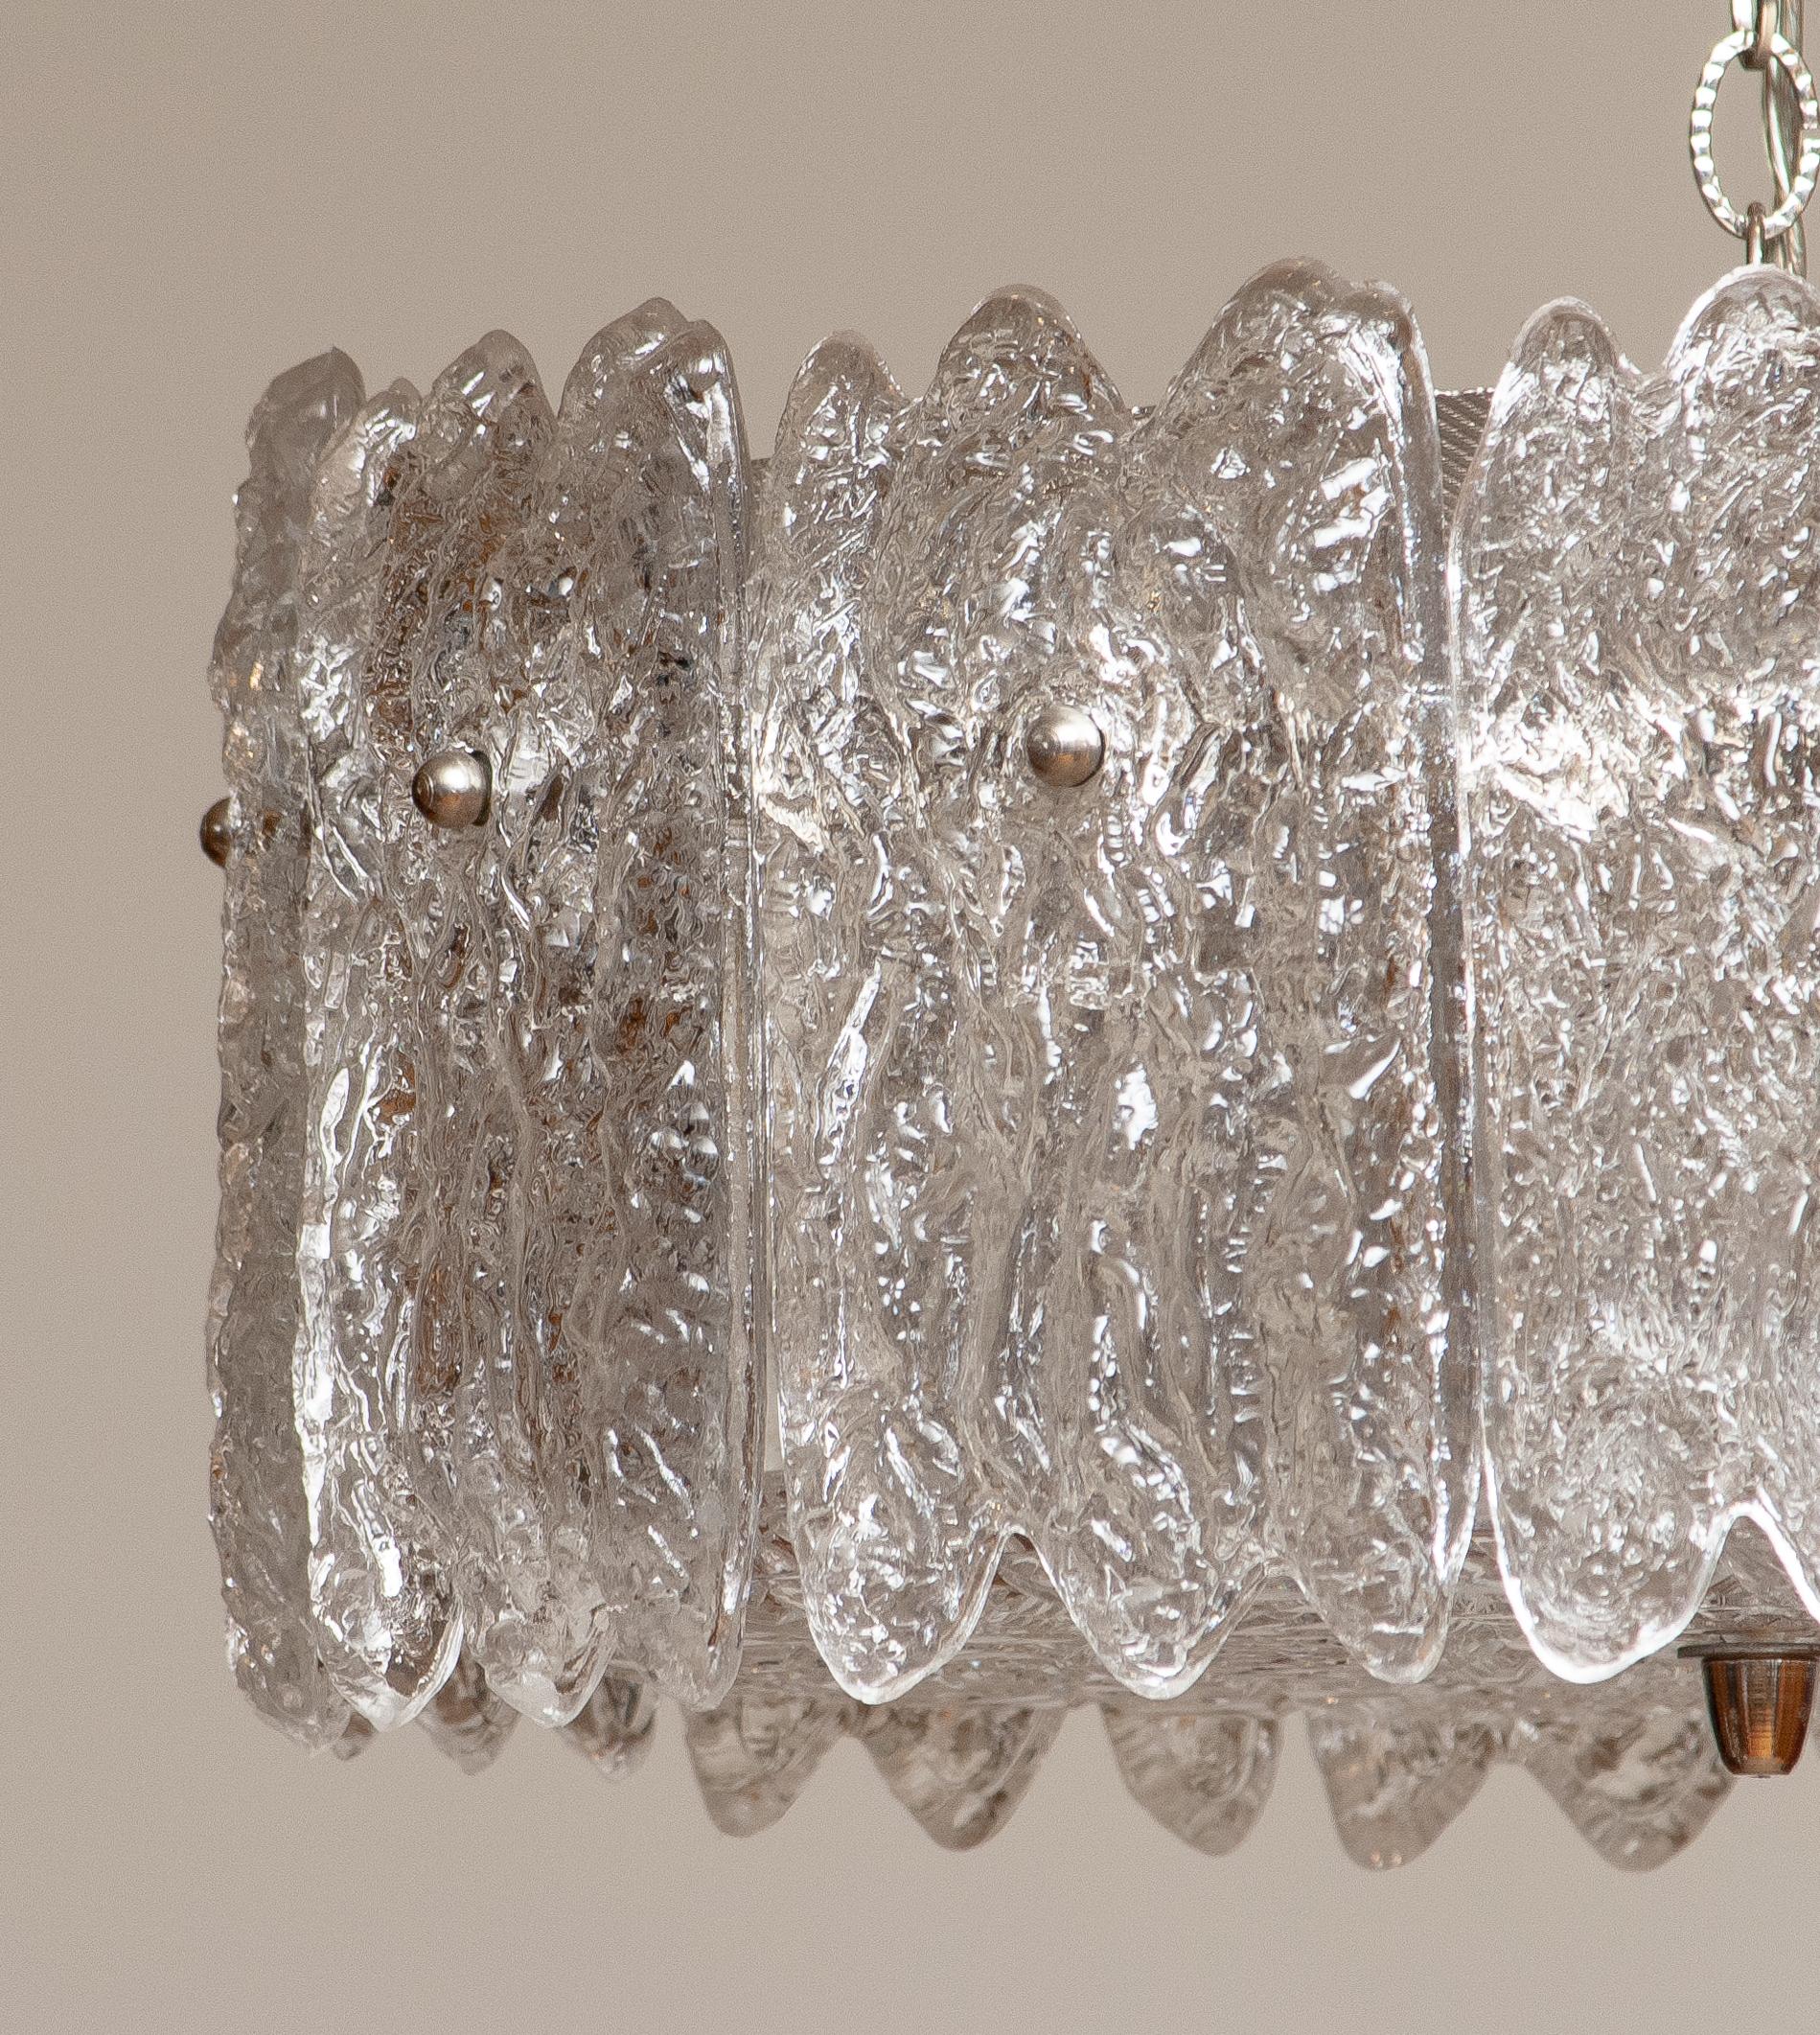 1960s, Large Ice Sculpted Crystal Pendant by Carl Fagerlund for Orrefors, Sweden In Good Condition For Sale In Silvolde, Gelderland